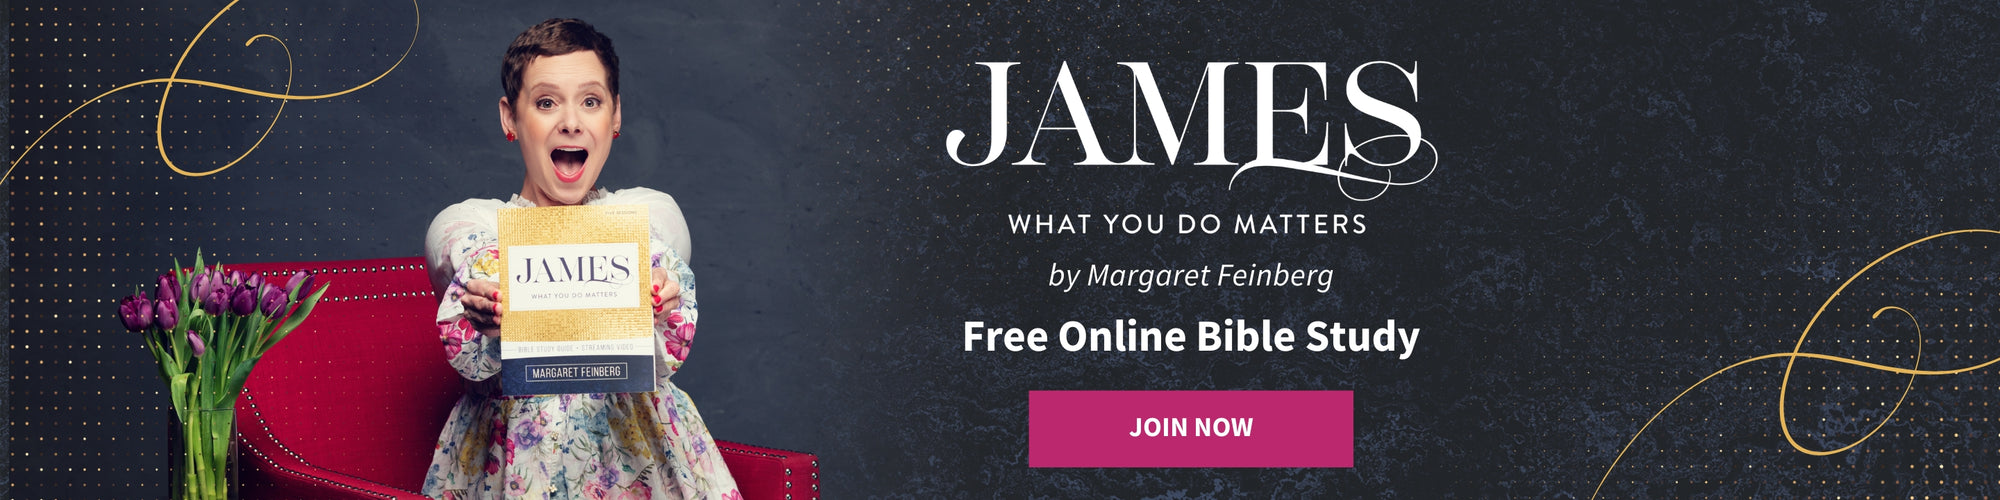 Free Online Bible Study - James by Margaret Feinberg